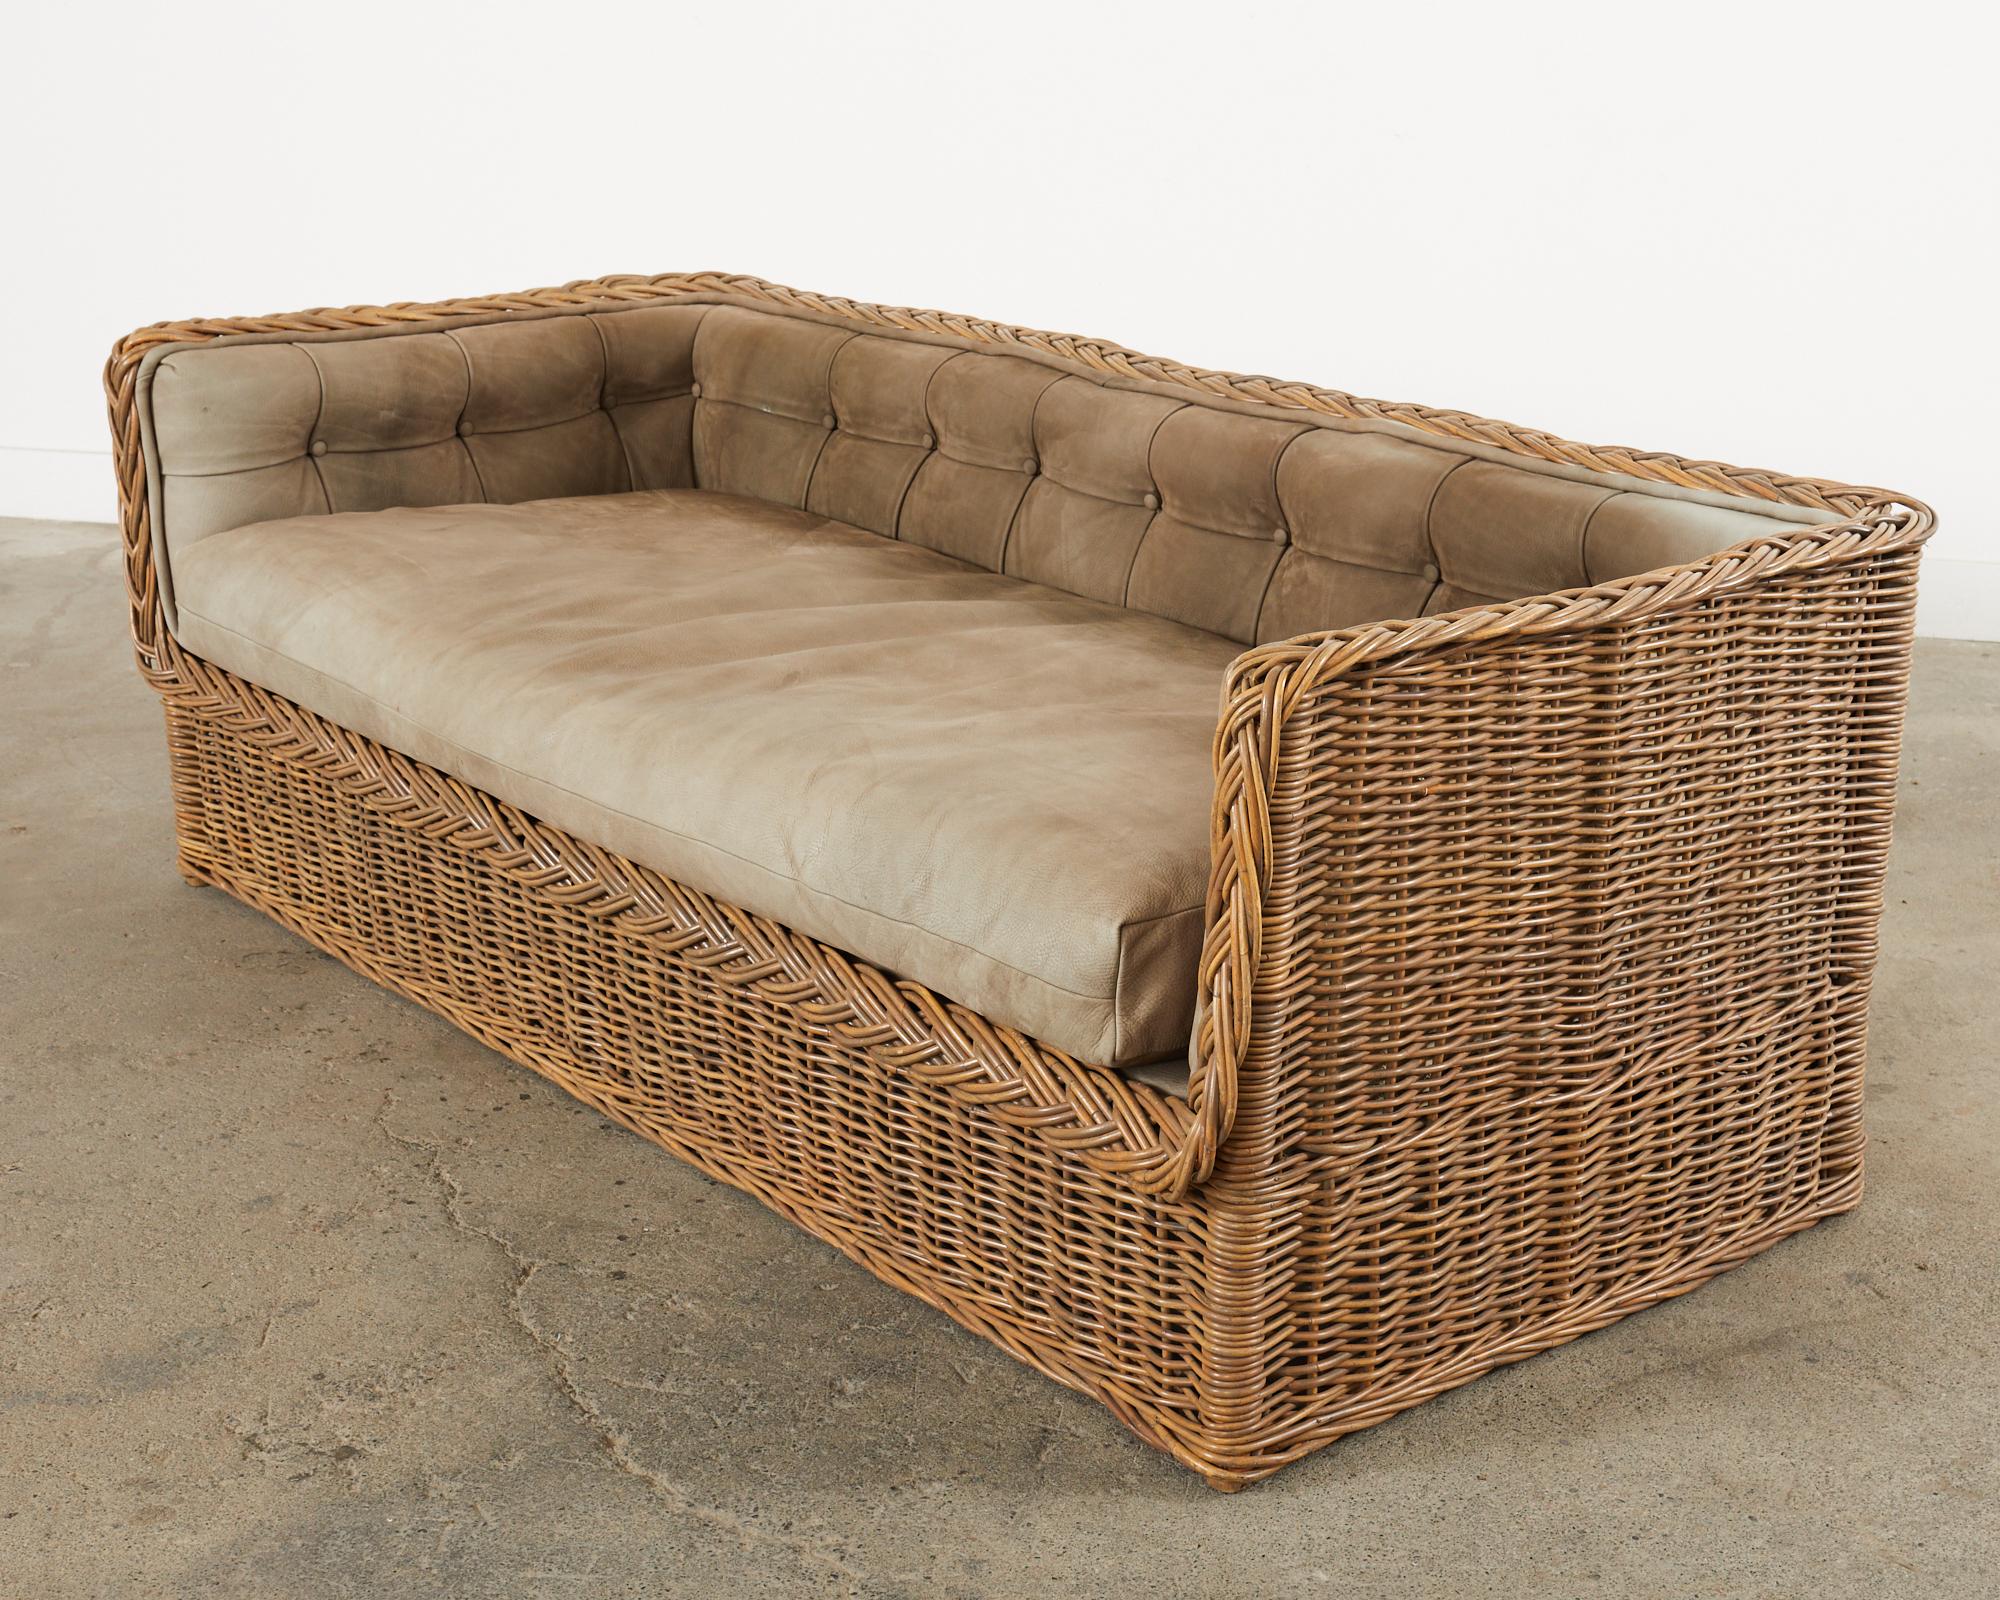 Michael Taylor Style Wicker Rattan Daybed Sofa by Wicker Works 8